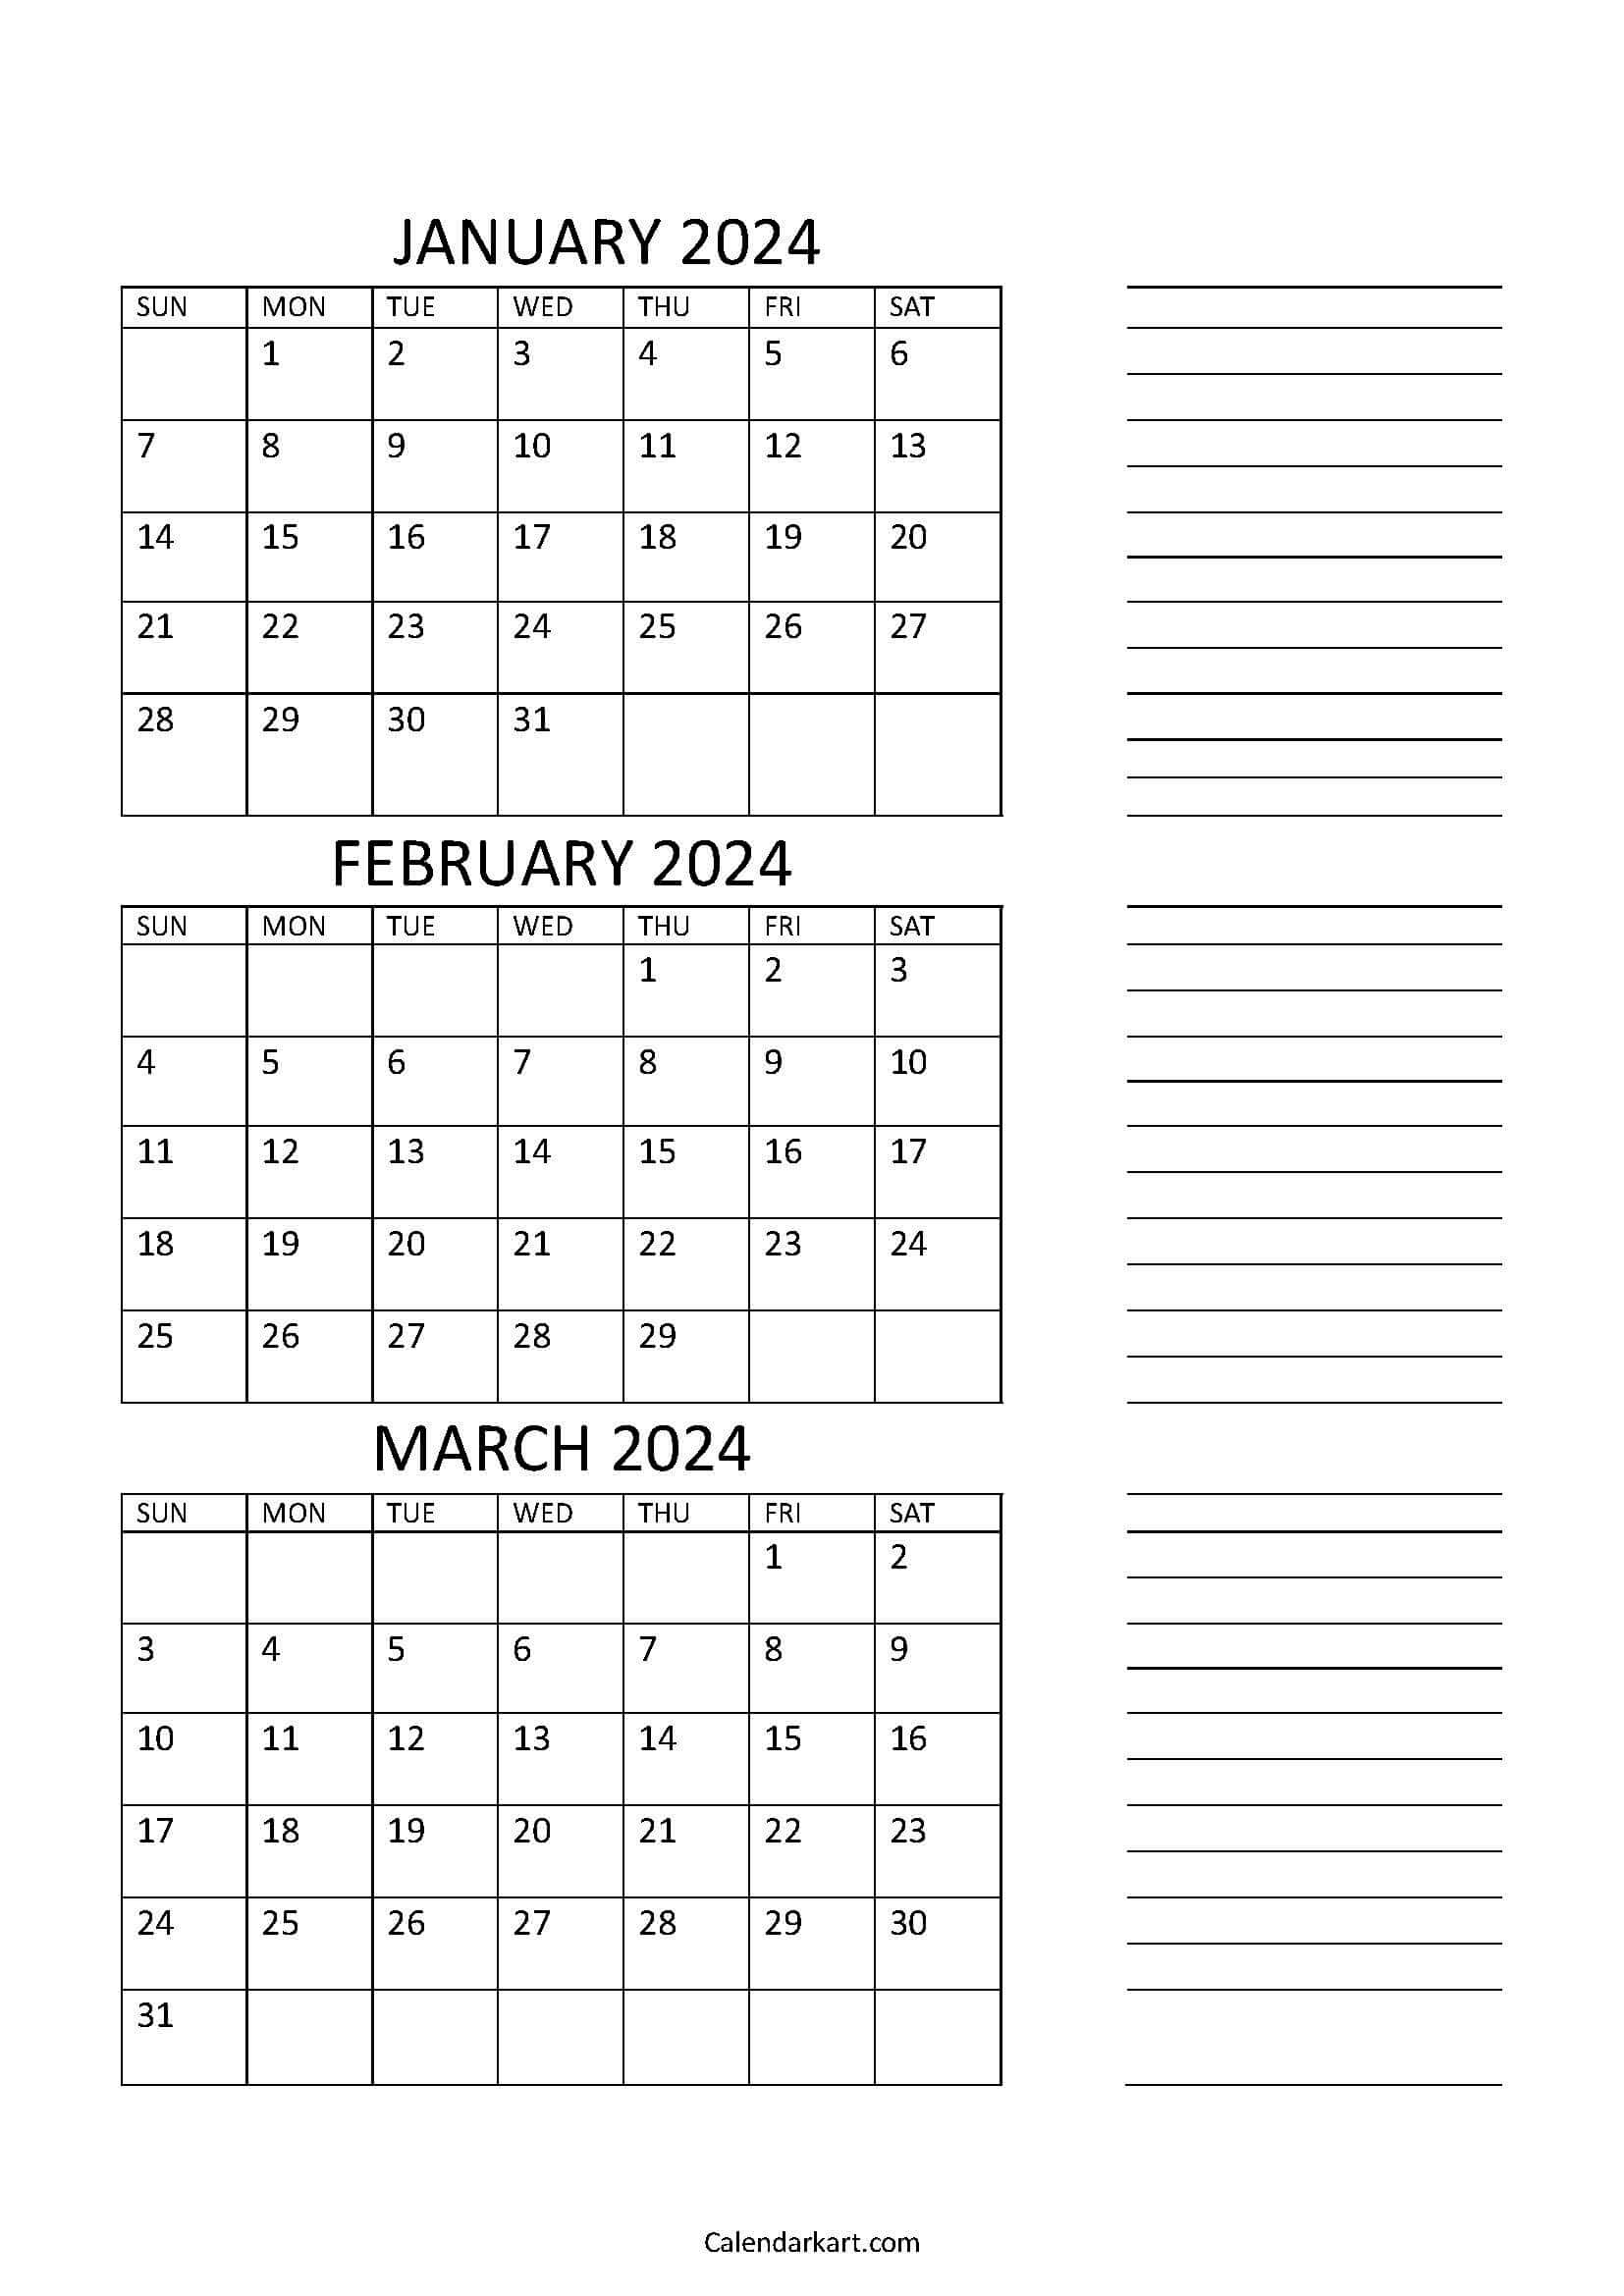 Free Printable January To March 2024 Calendar - Calendarkart with regard to Free Printable Calendar 2024 3 Months Per Page